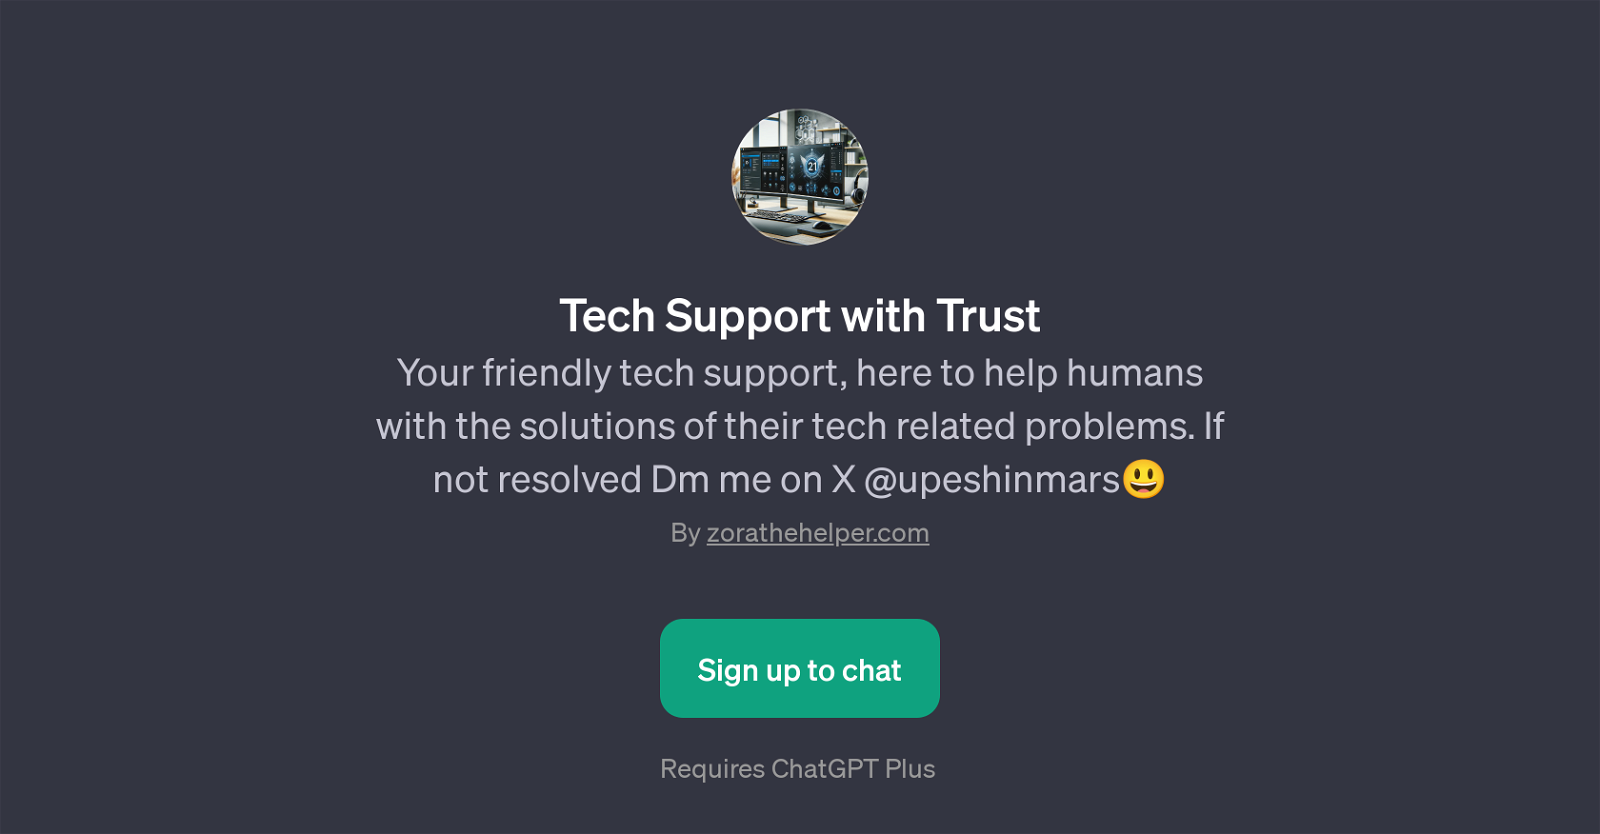 Tech Support with Trust website